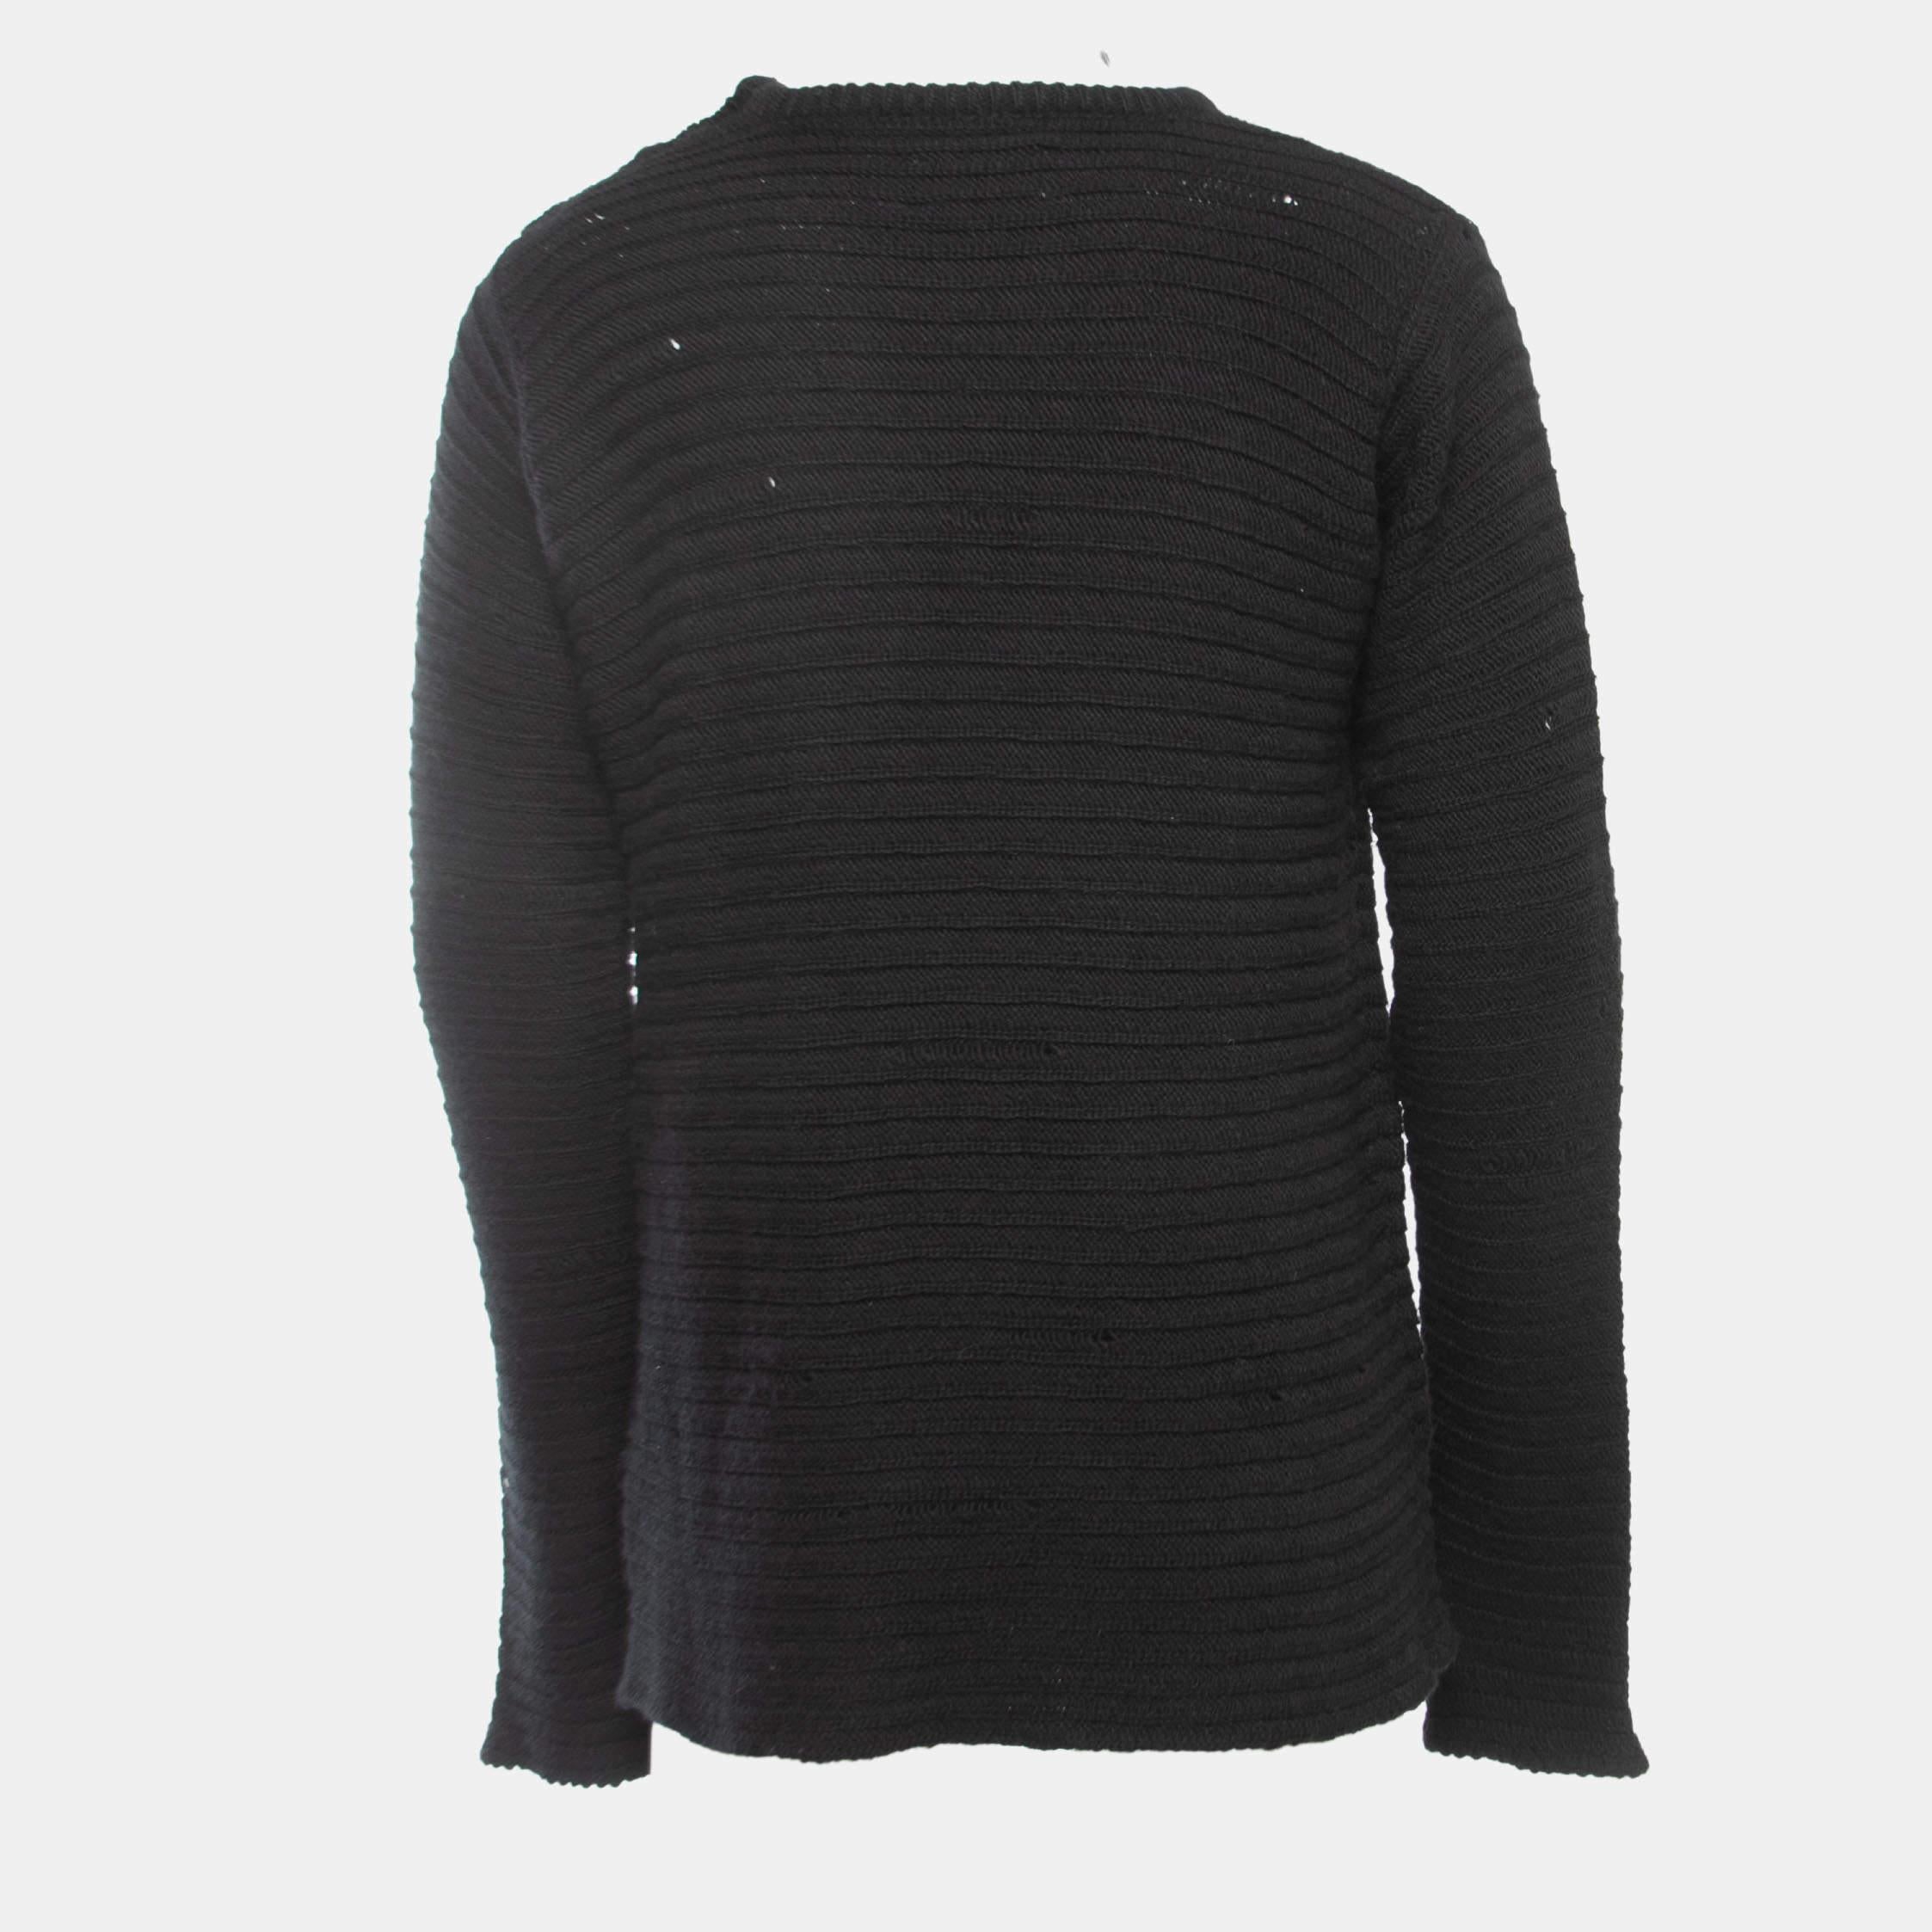 How fabulous does this designer sweater look! It is made of fine materials and features long sleeves. Pair it with pants and sneakers for a cool look.

Includes: Brand Tag with extra button